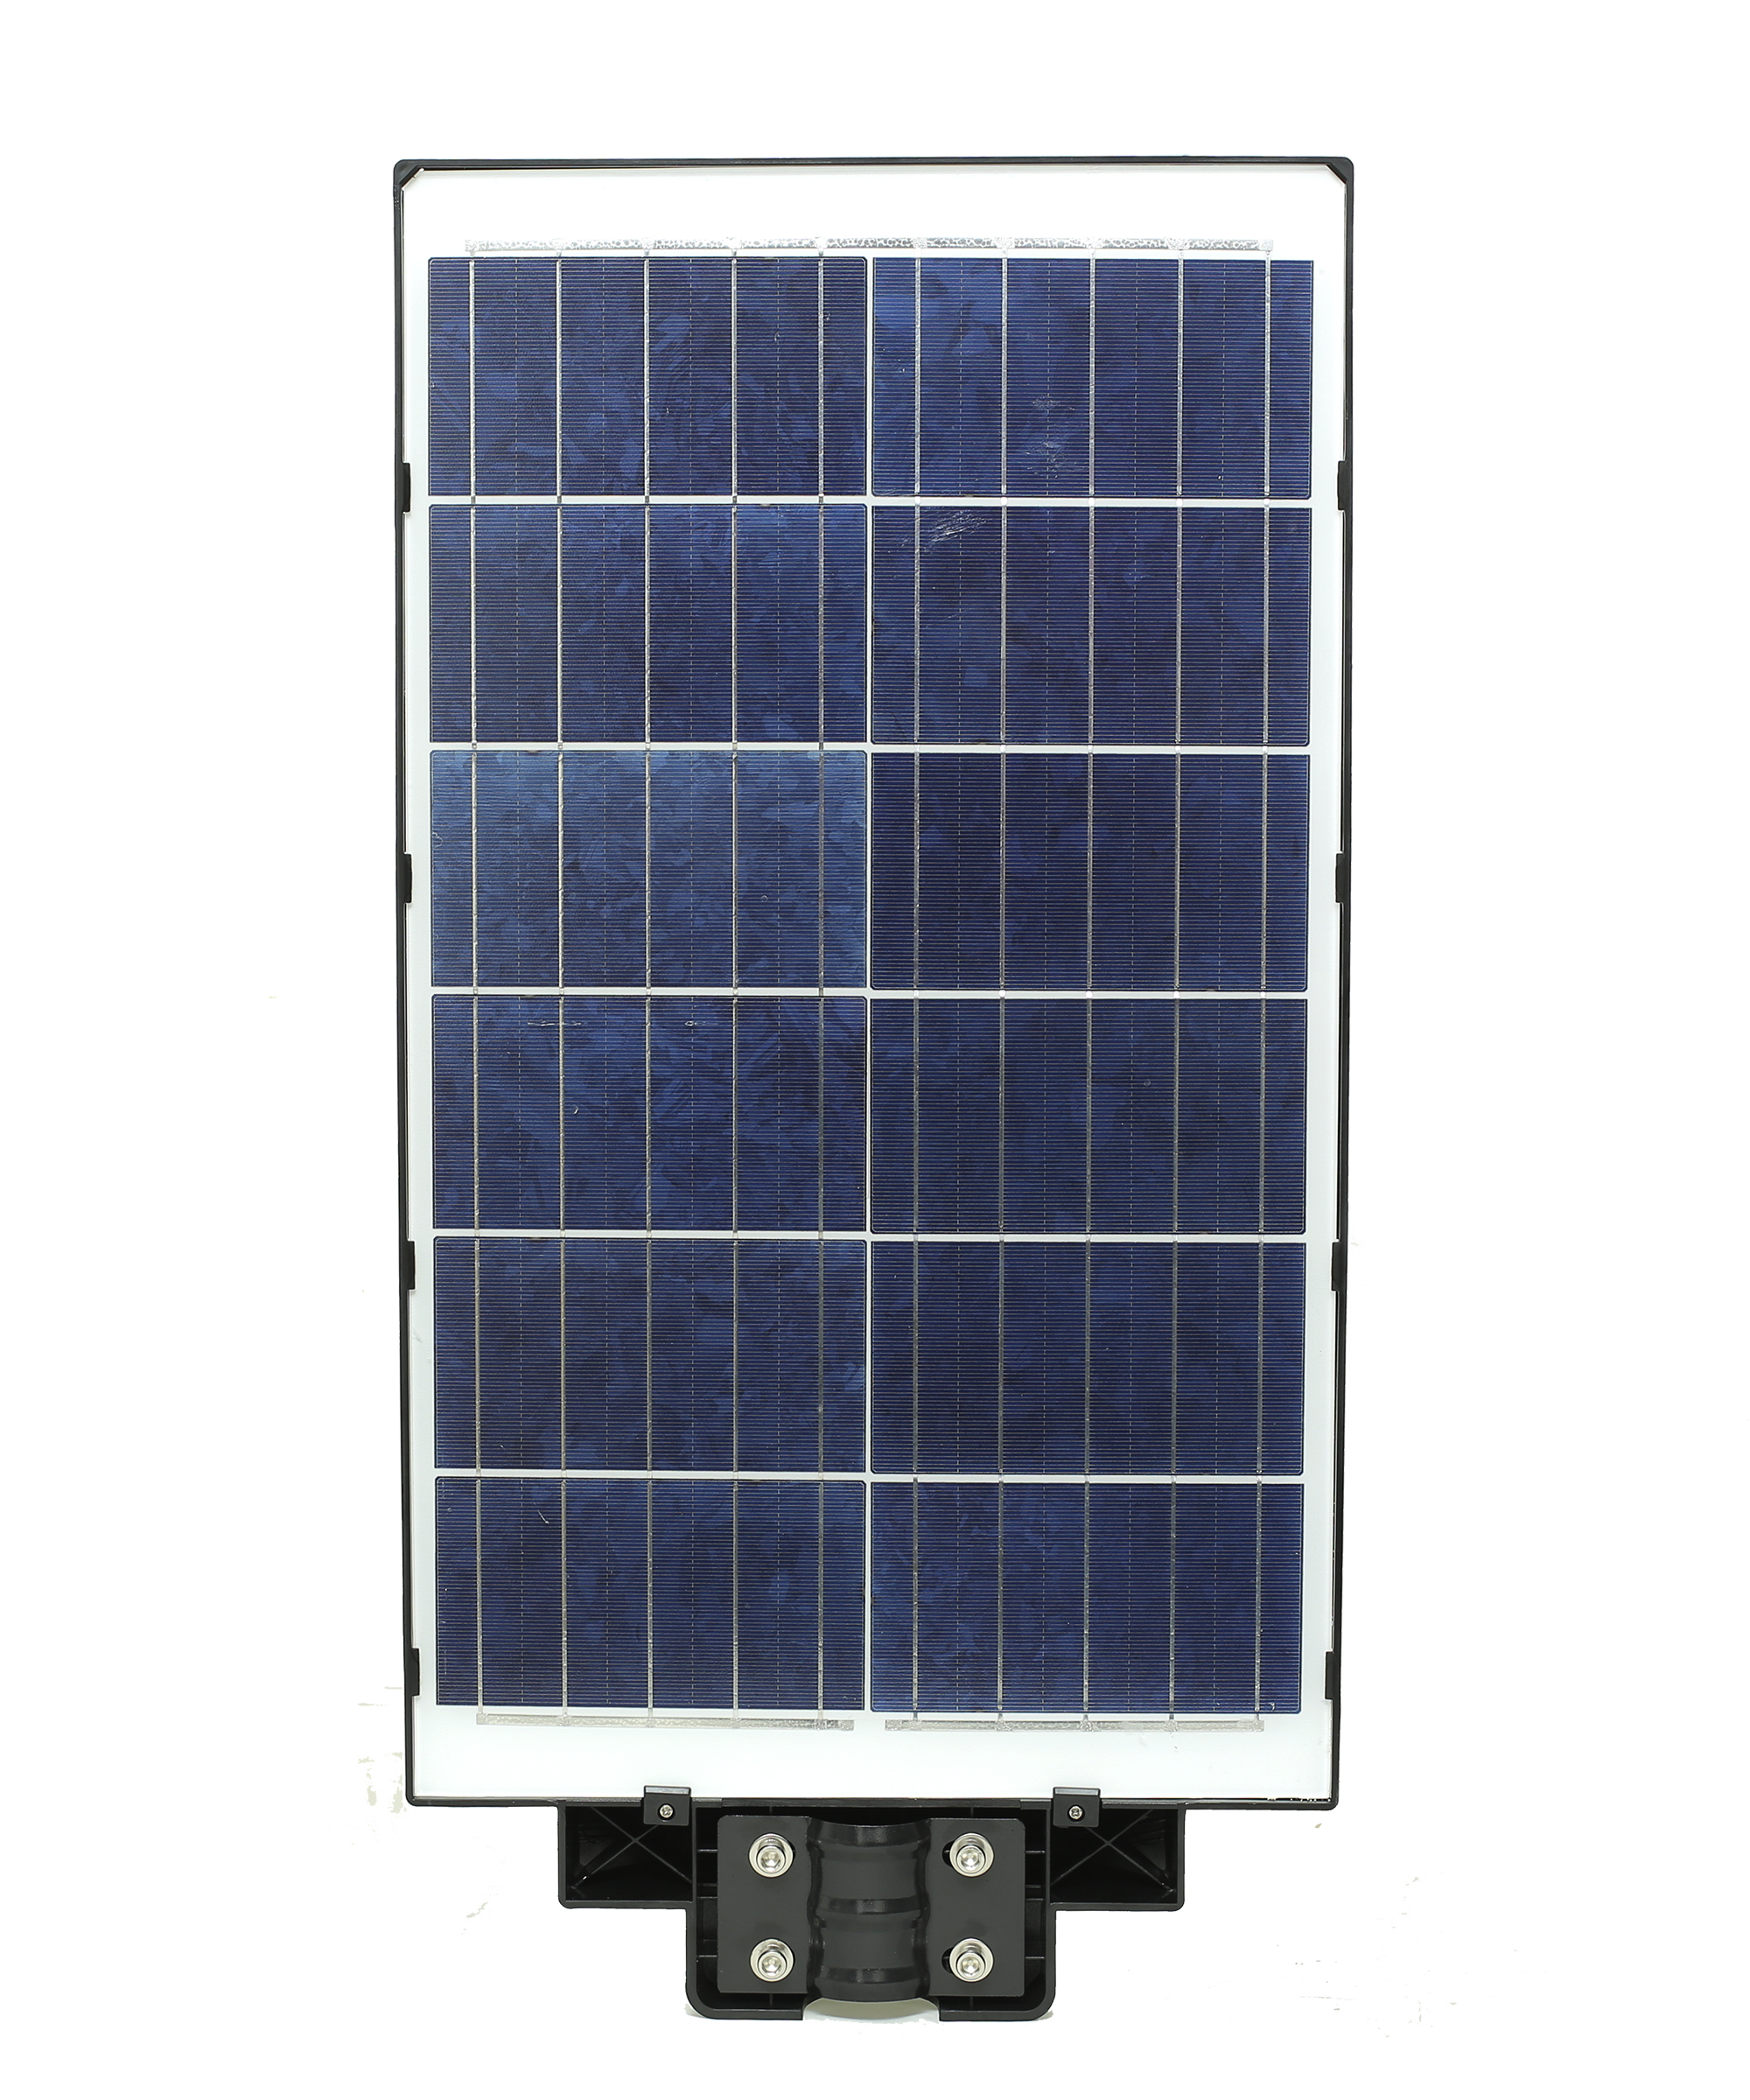 RealBuy Solar LED Street Light 350W with Remote Control and Motion Sensor